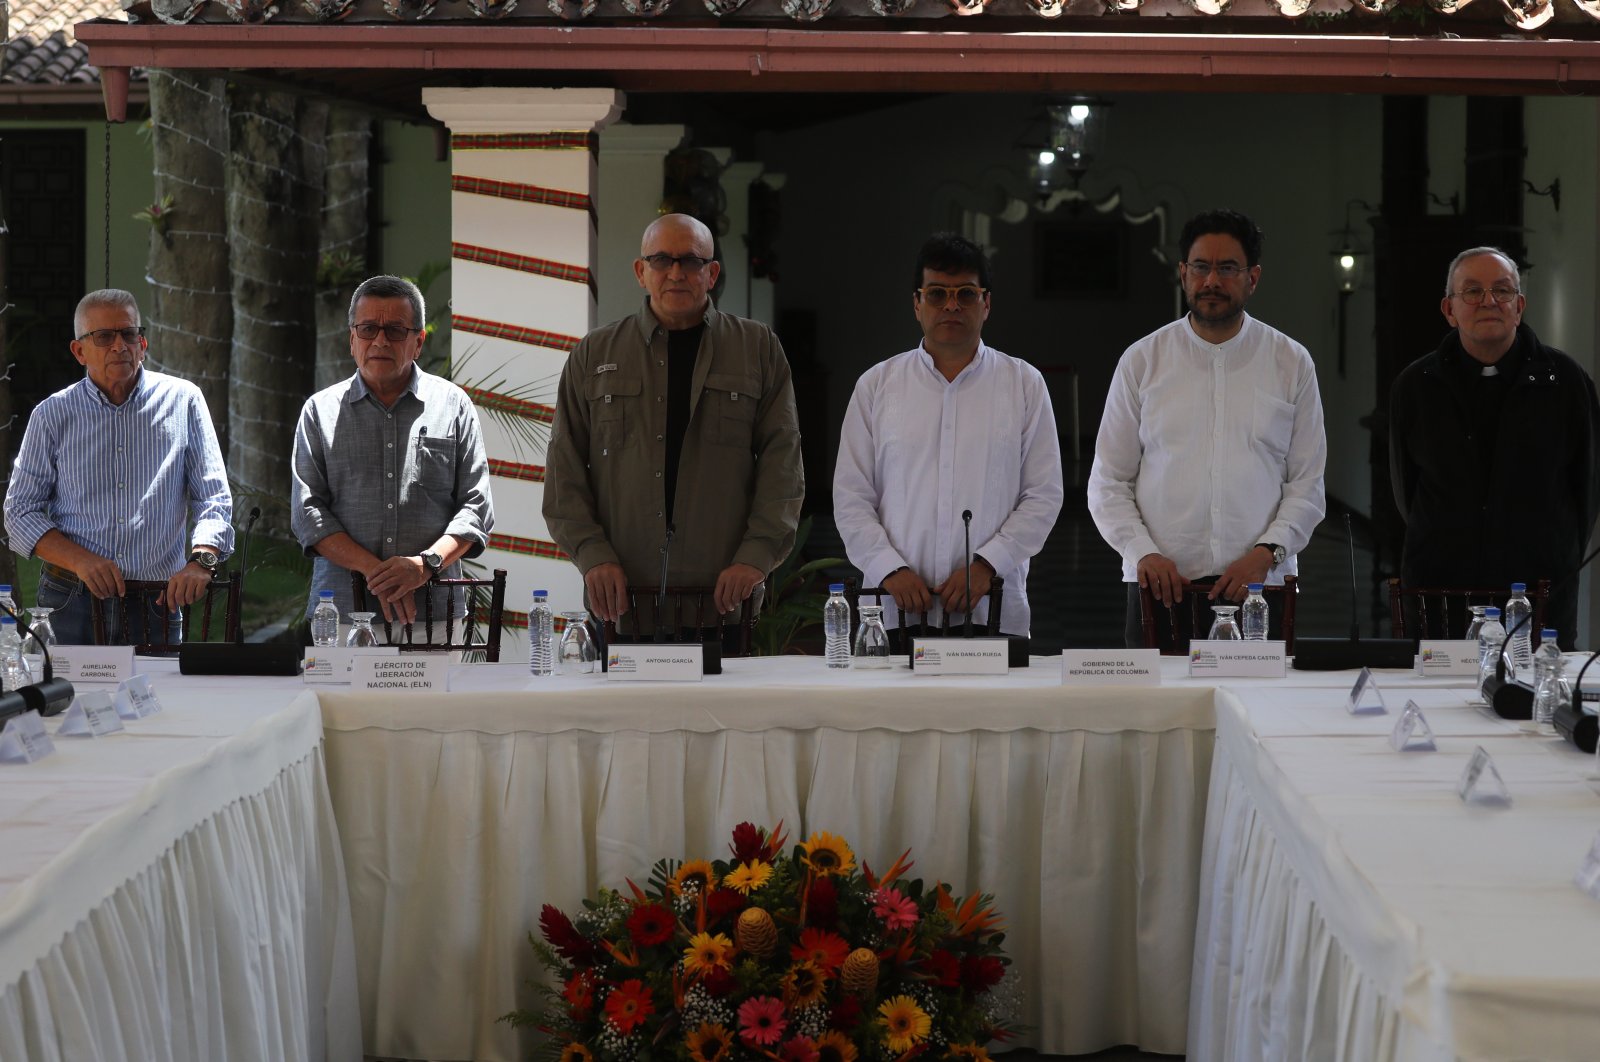 ELN spokesmen Aureliano Carbonell (L), Pablo Beltran (2-L), and Antonio Garcia (3-L), Colombian government spokesmen Ivan Danilo Rueda (3-R) and Ivan Cepeda Castro (2-R), and priest Hector Fabio Henao (R) participate in a meeting between the Colombian government and the National Liberation Army (ELN), in Caracas, Venezuela, Oct. 4, 2022. (EPA Photo)